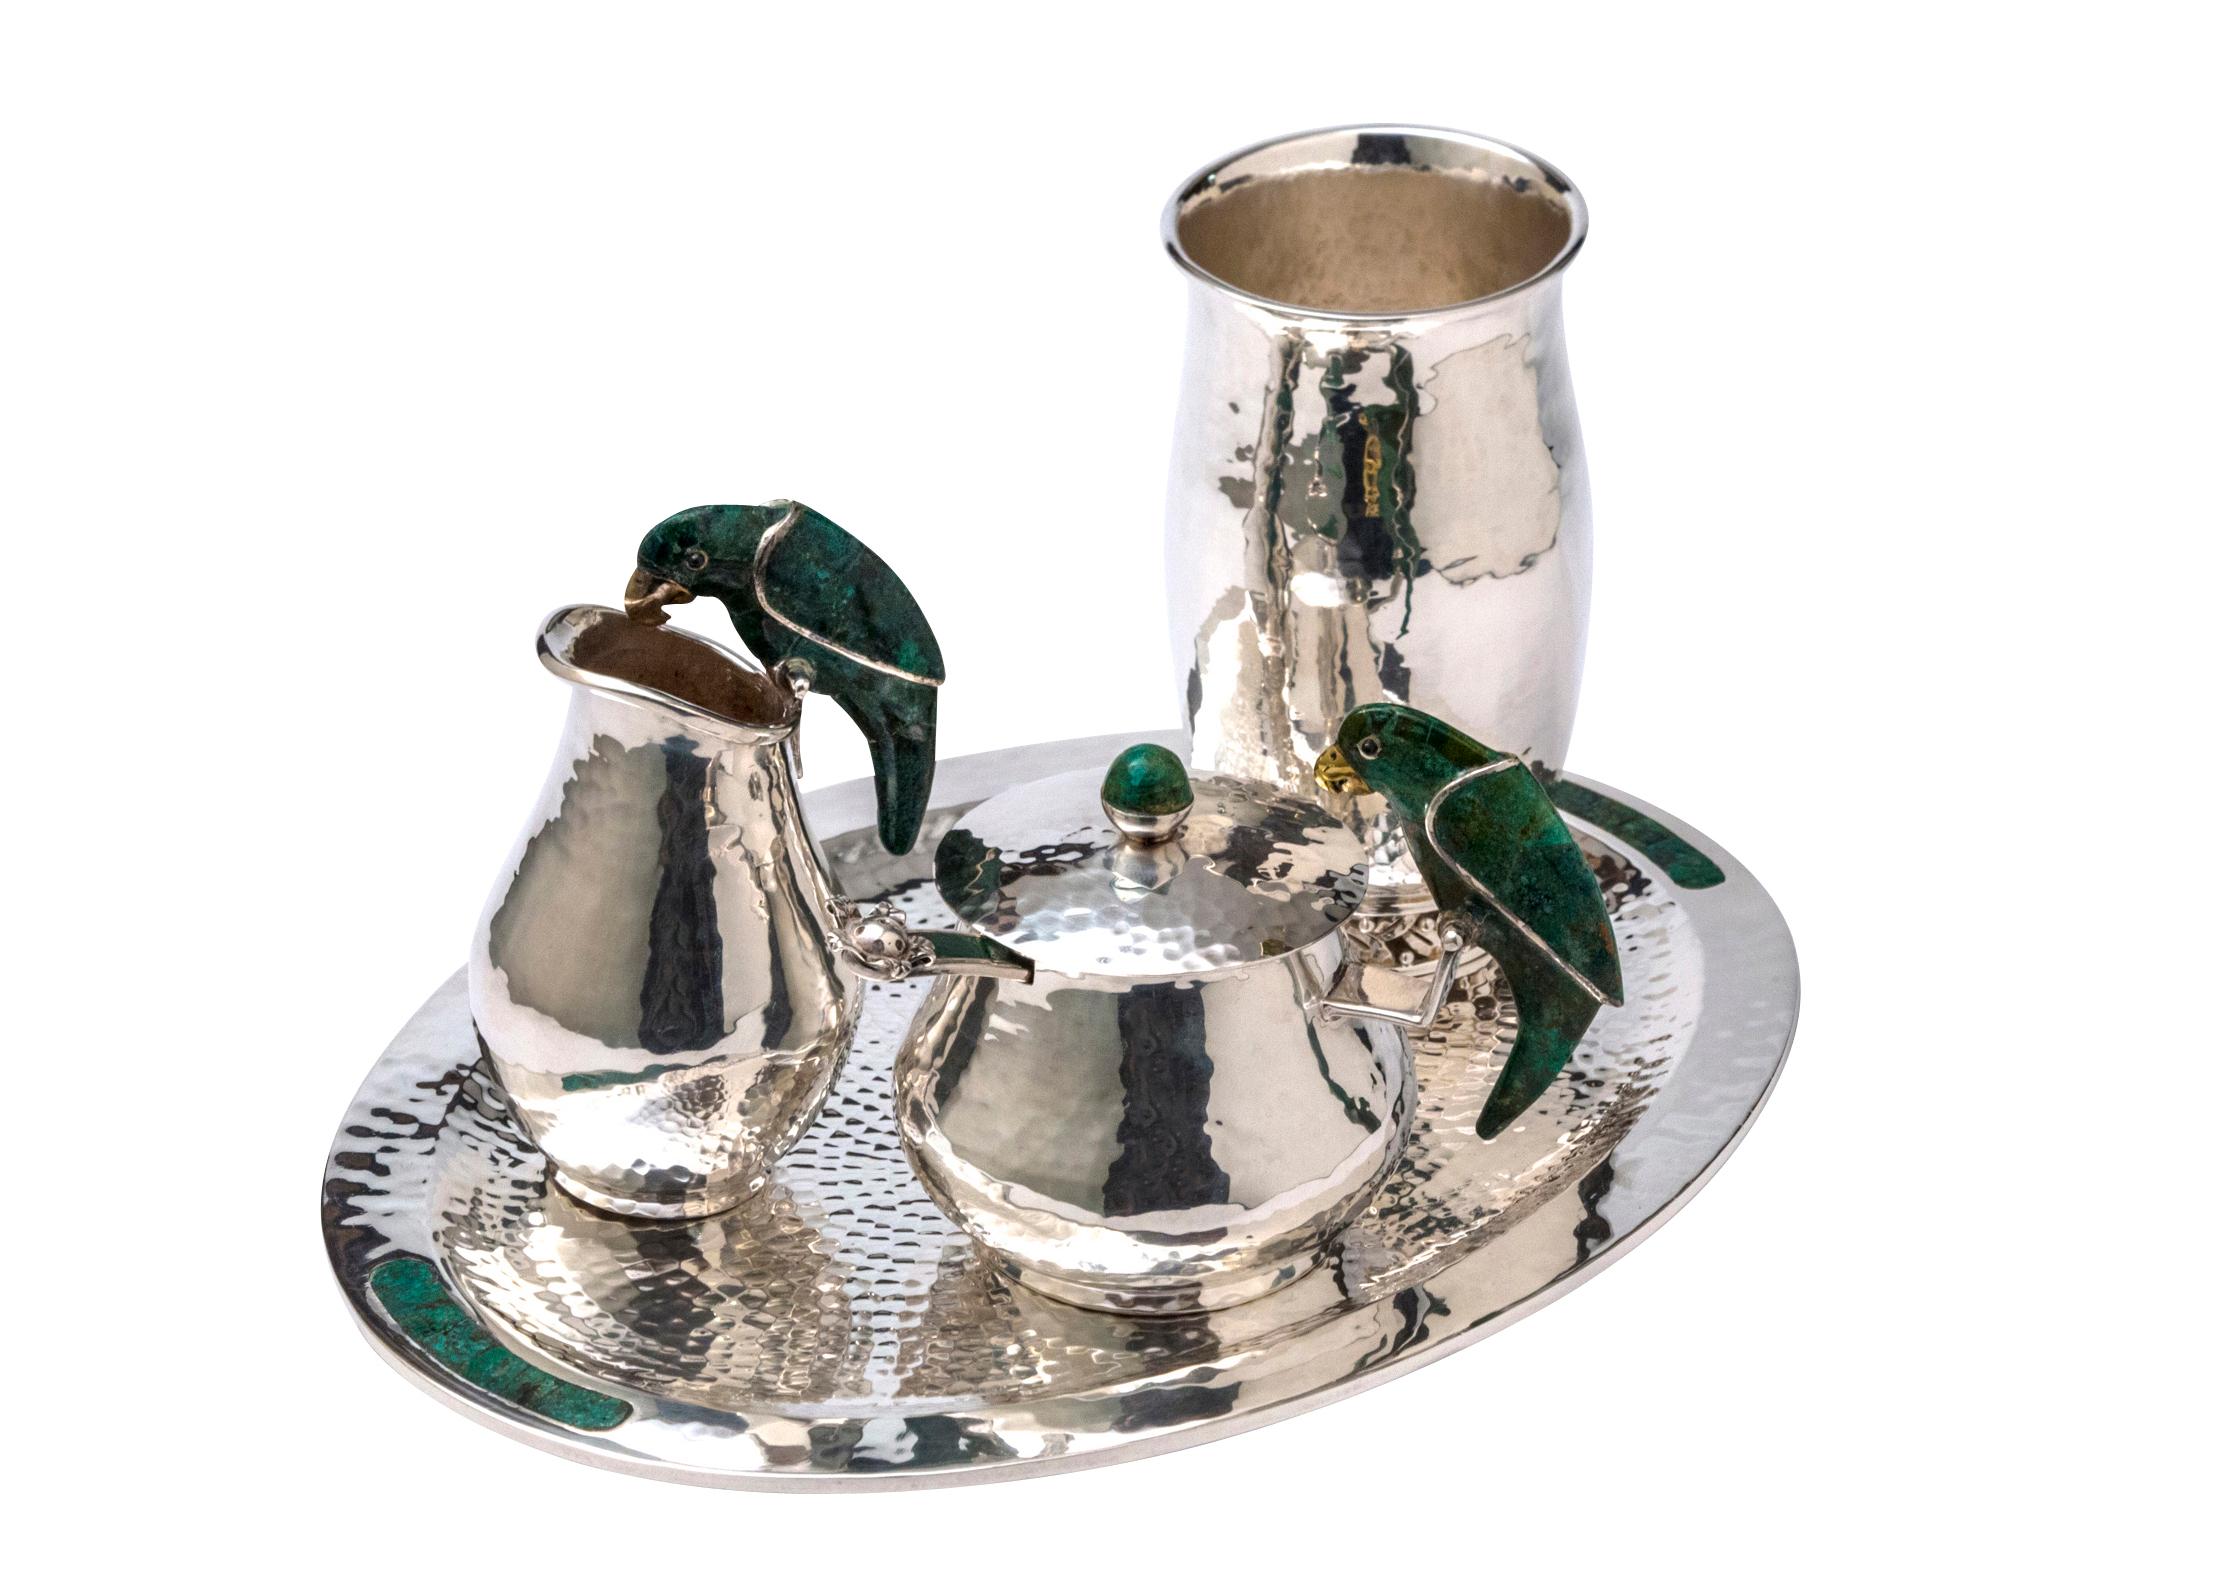 Silver drink service set by Emilia Castillo.

5-piece hammered silver plate Emilia Castillo parrot drink service set with parrot motif at single side handles featuring inlaid green turquoise and brand stamp at undersides. Includes 1 tray (12